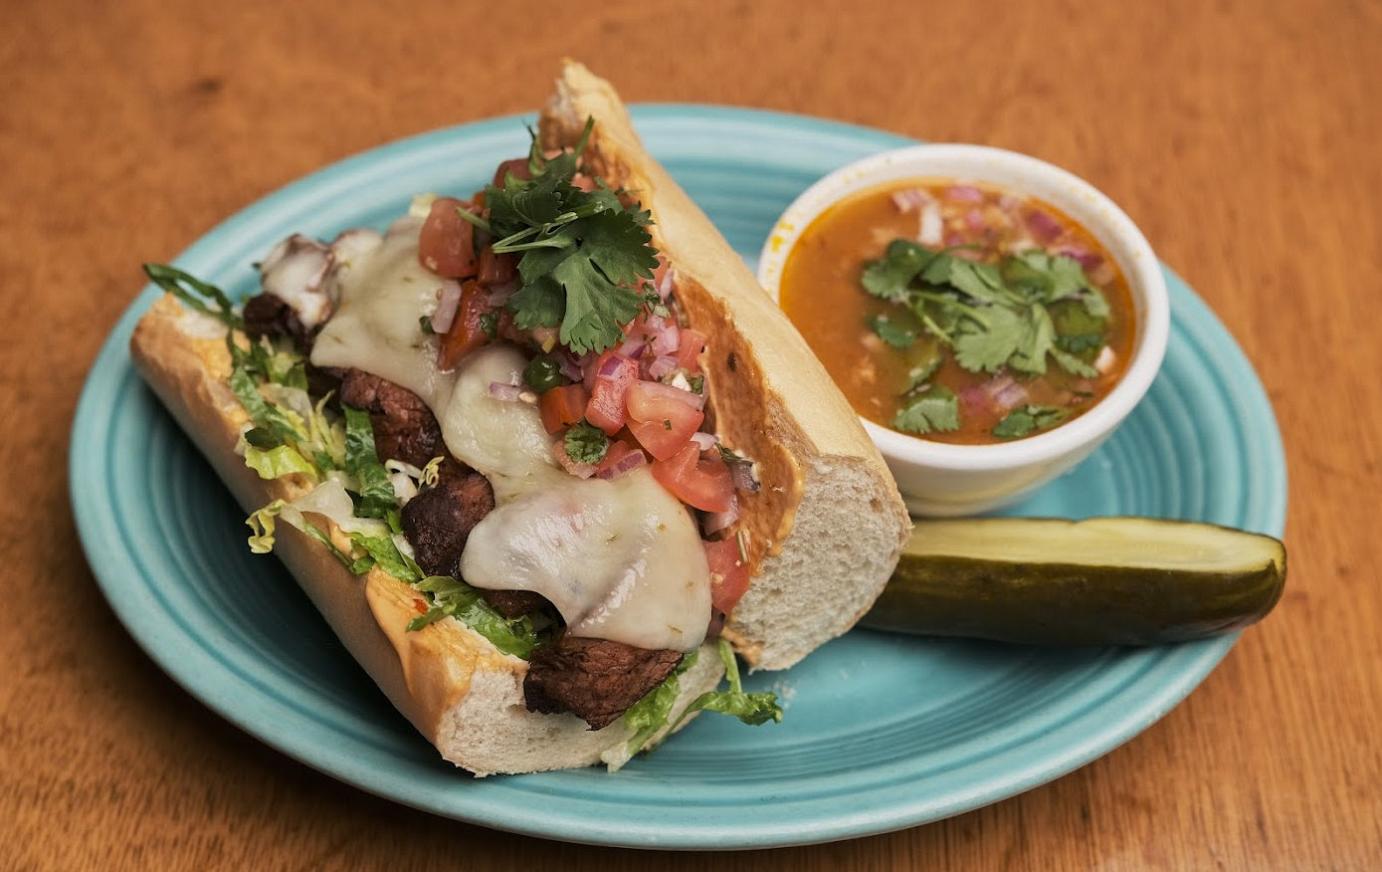 Southwest Steak Sandwich with Soup of the Moment